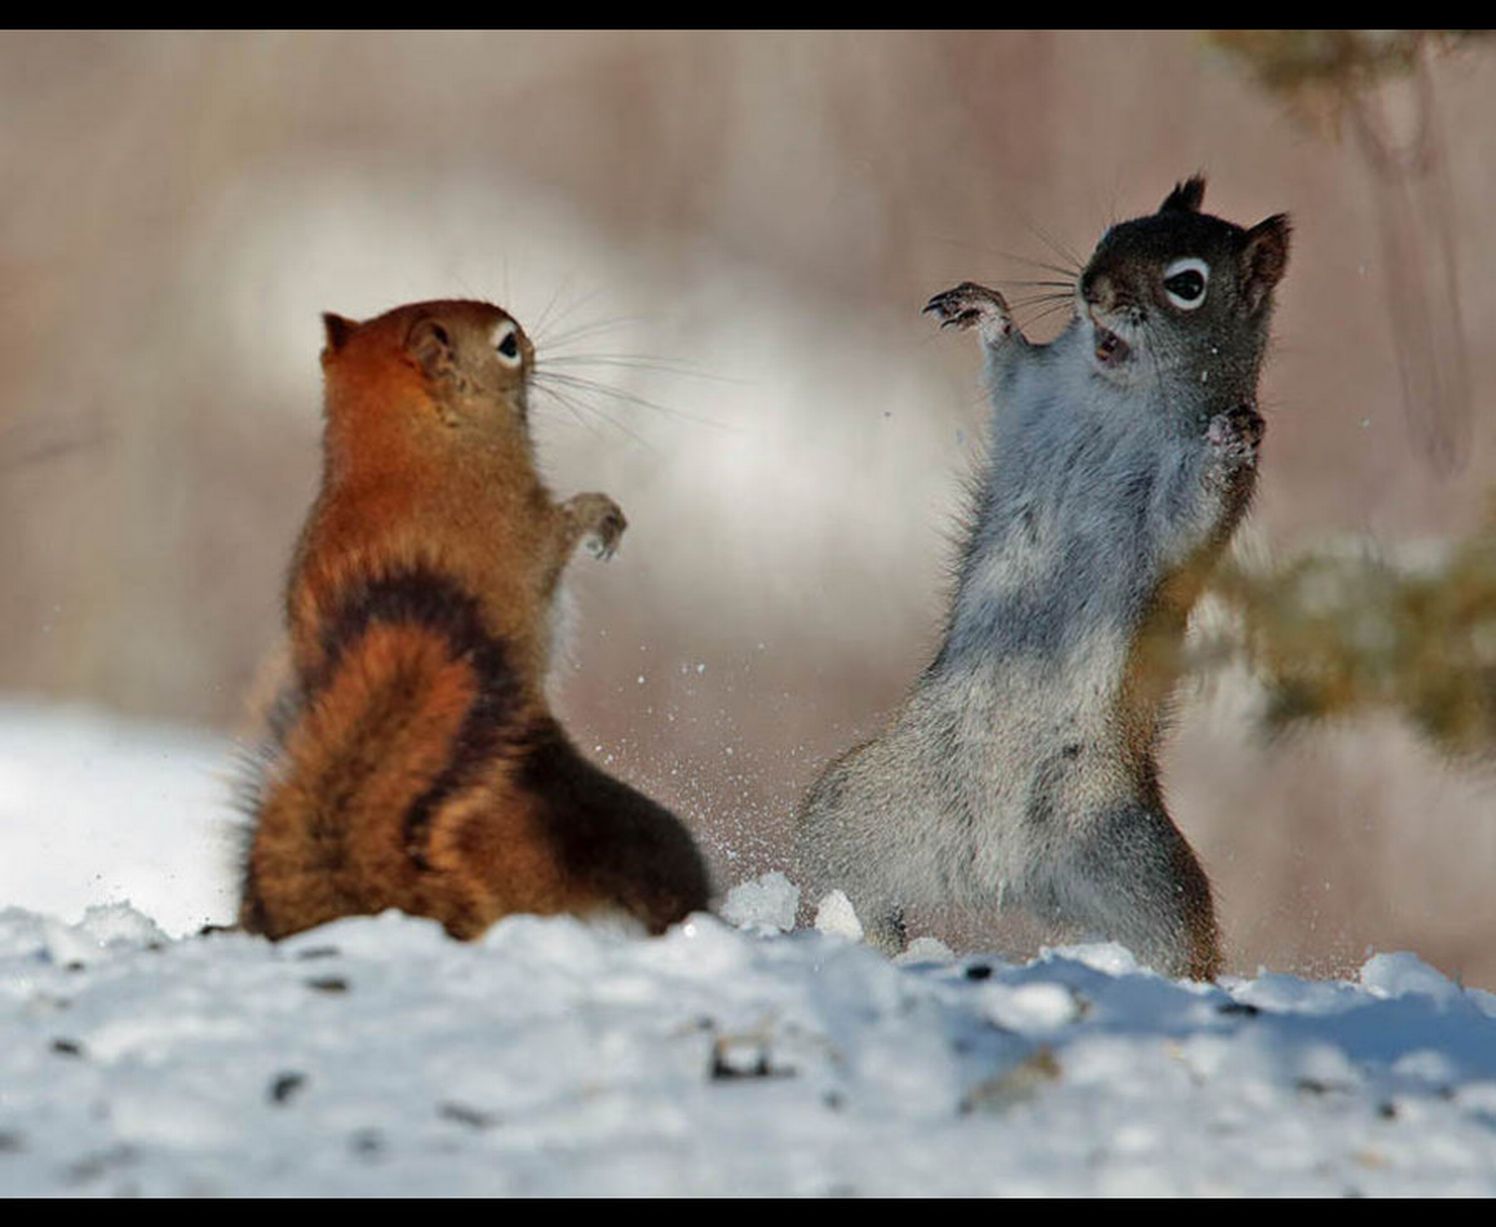 Hilarious squirrel gives it's best Michael Jackson Thriller impression